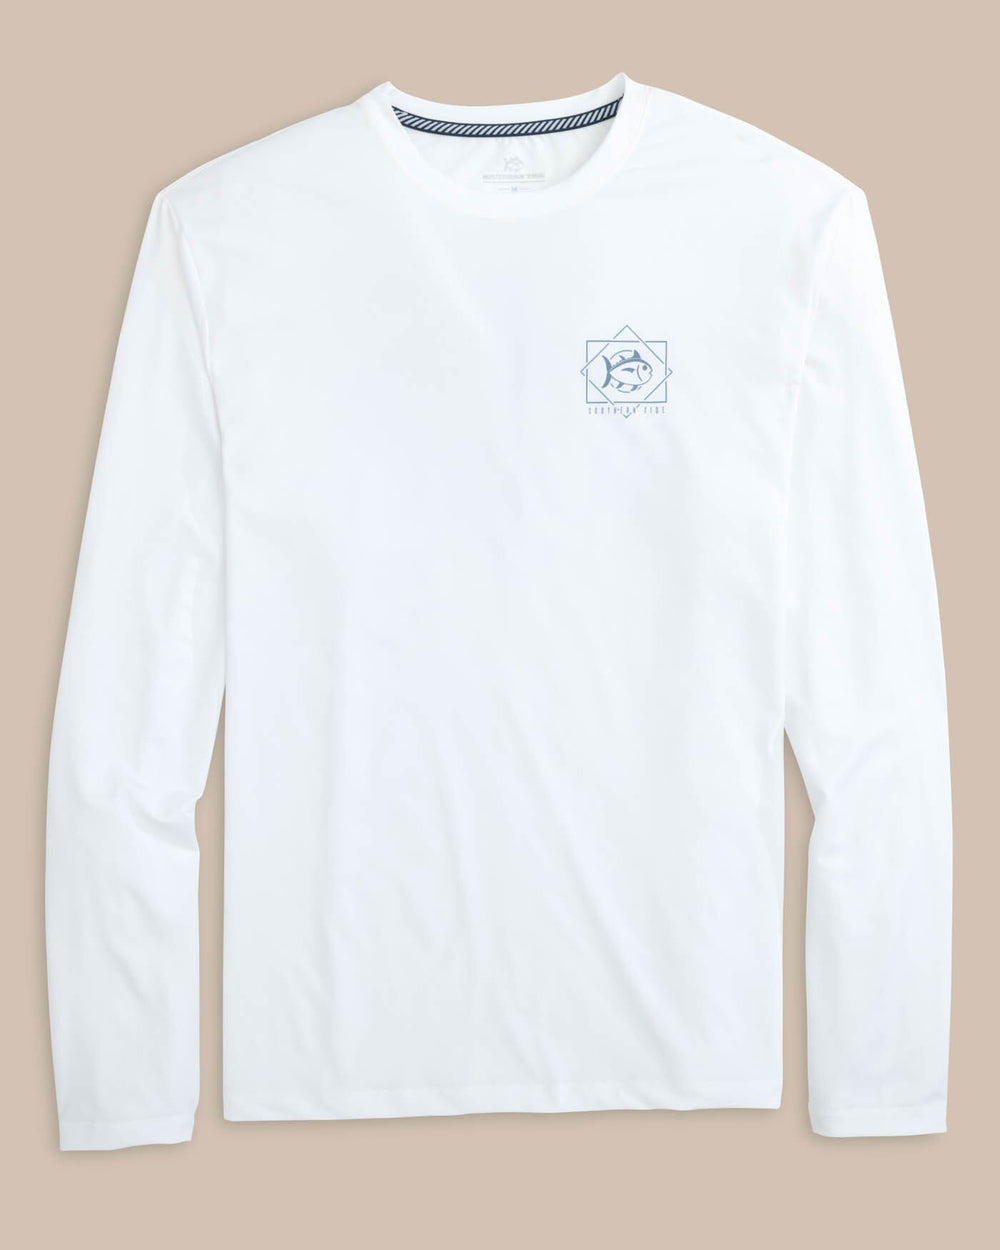 The front view of the Southern Tide Geometric Striped Long Sleeve Performance T-shirt by Southern Tide - Classic White